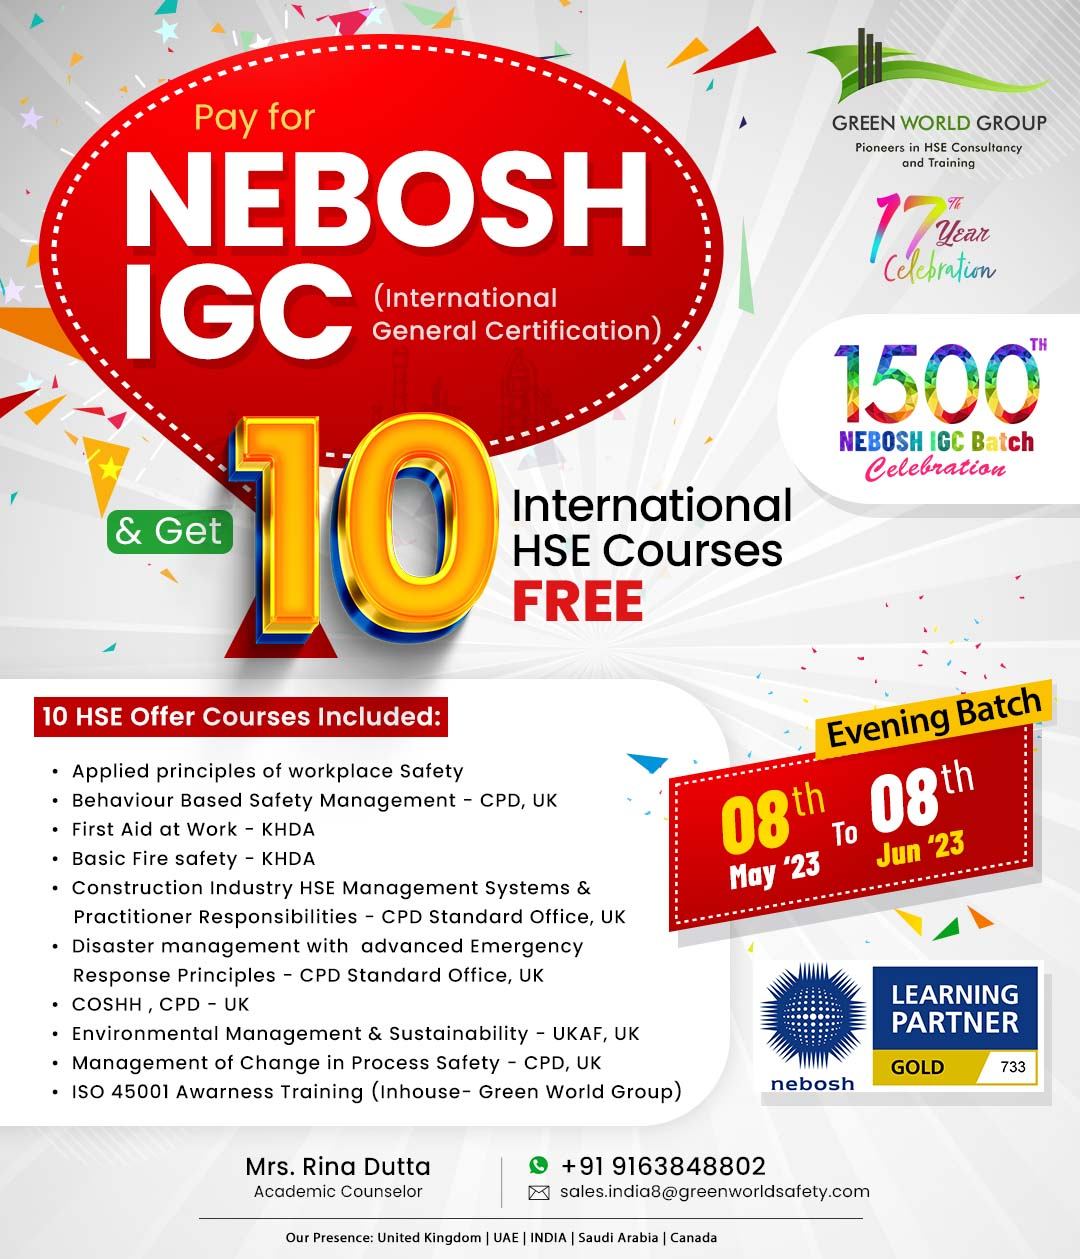 Excellent way to reach your career goals with NEBOSH IGC